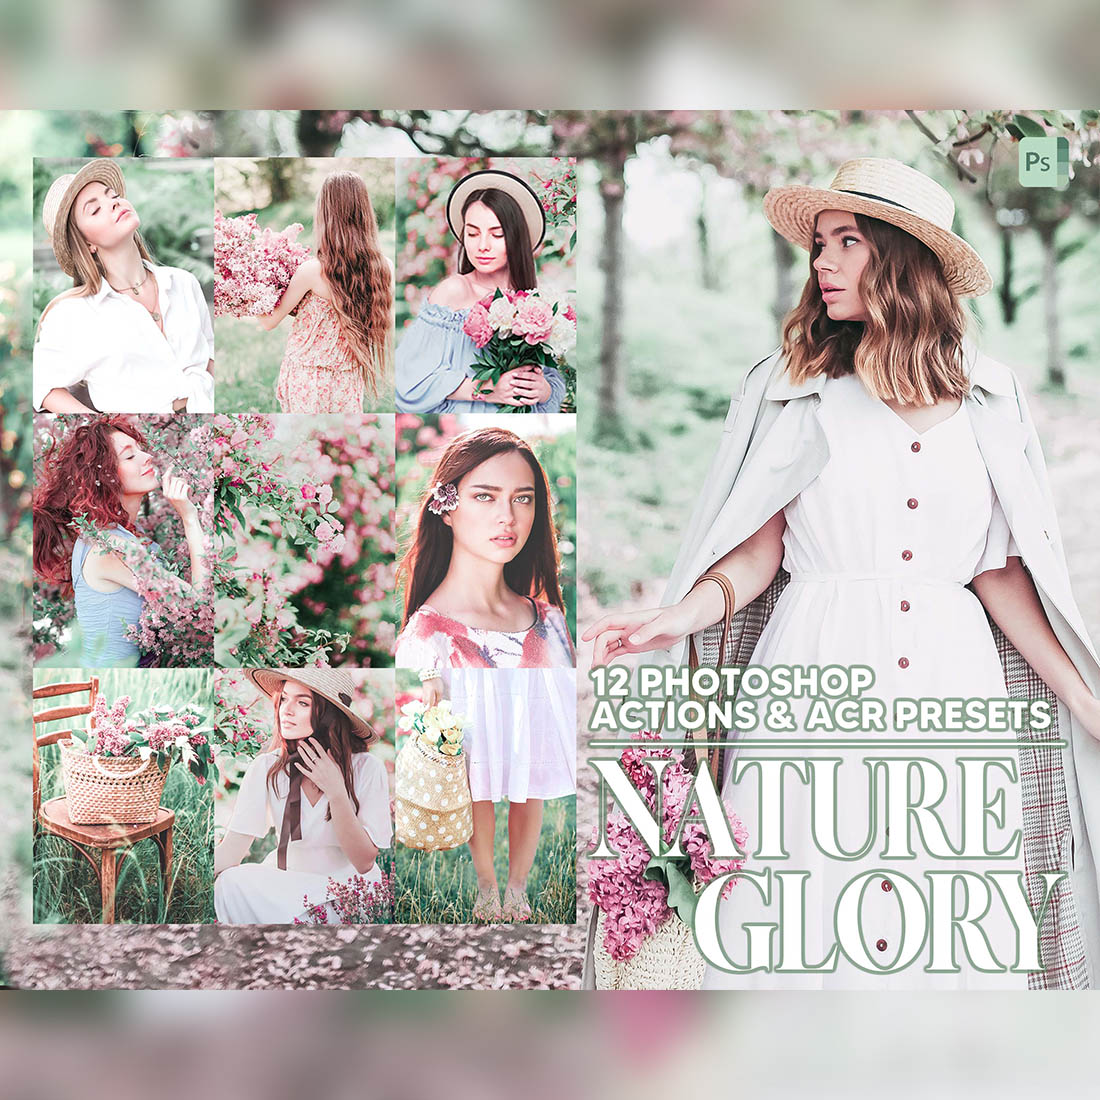 12 Photoshop Actions, Nature Glory Ps Action, Spring ACR Preset, Bright Ps Filter, Atn Portrait And Lifestyle Theme For Instagram, Blogger cover image.